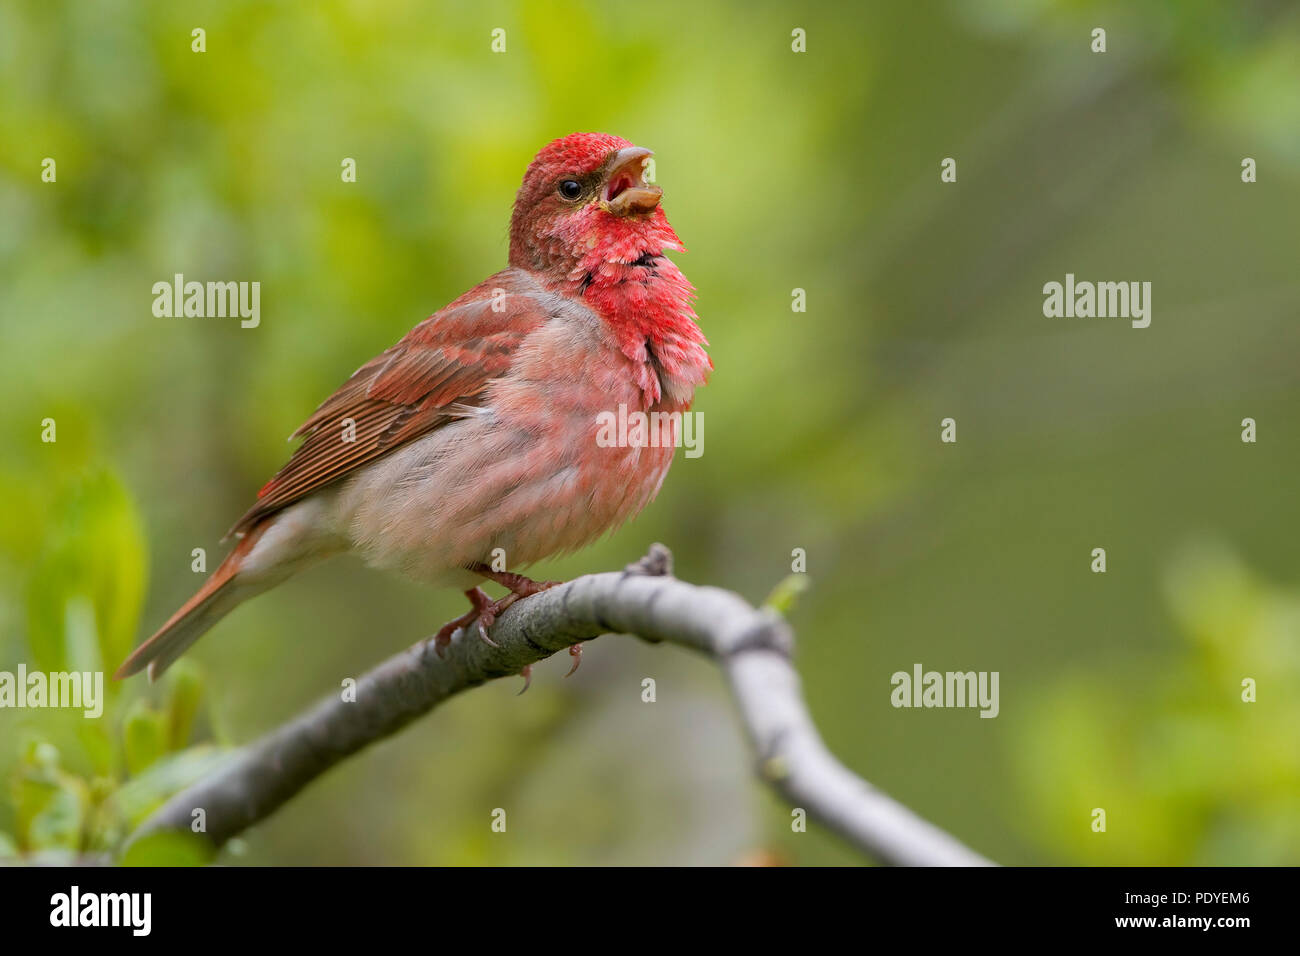 A Scarlet Rosefinch singing on a twig Stock Photo